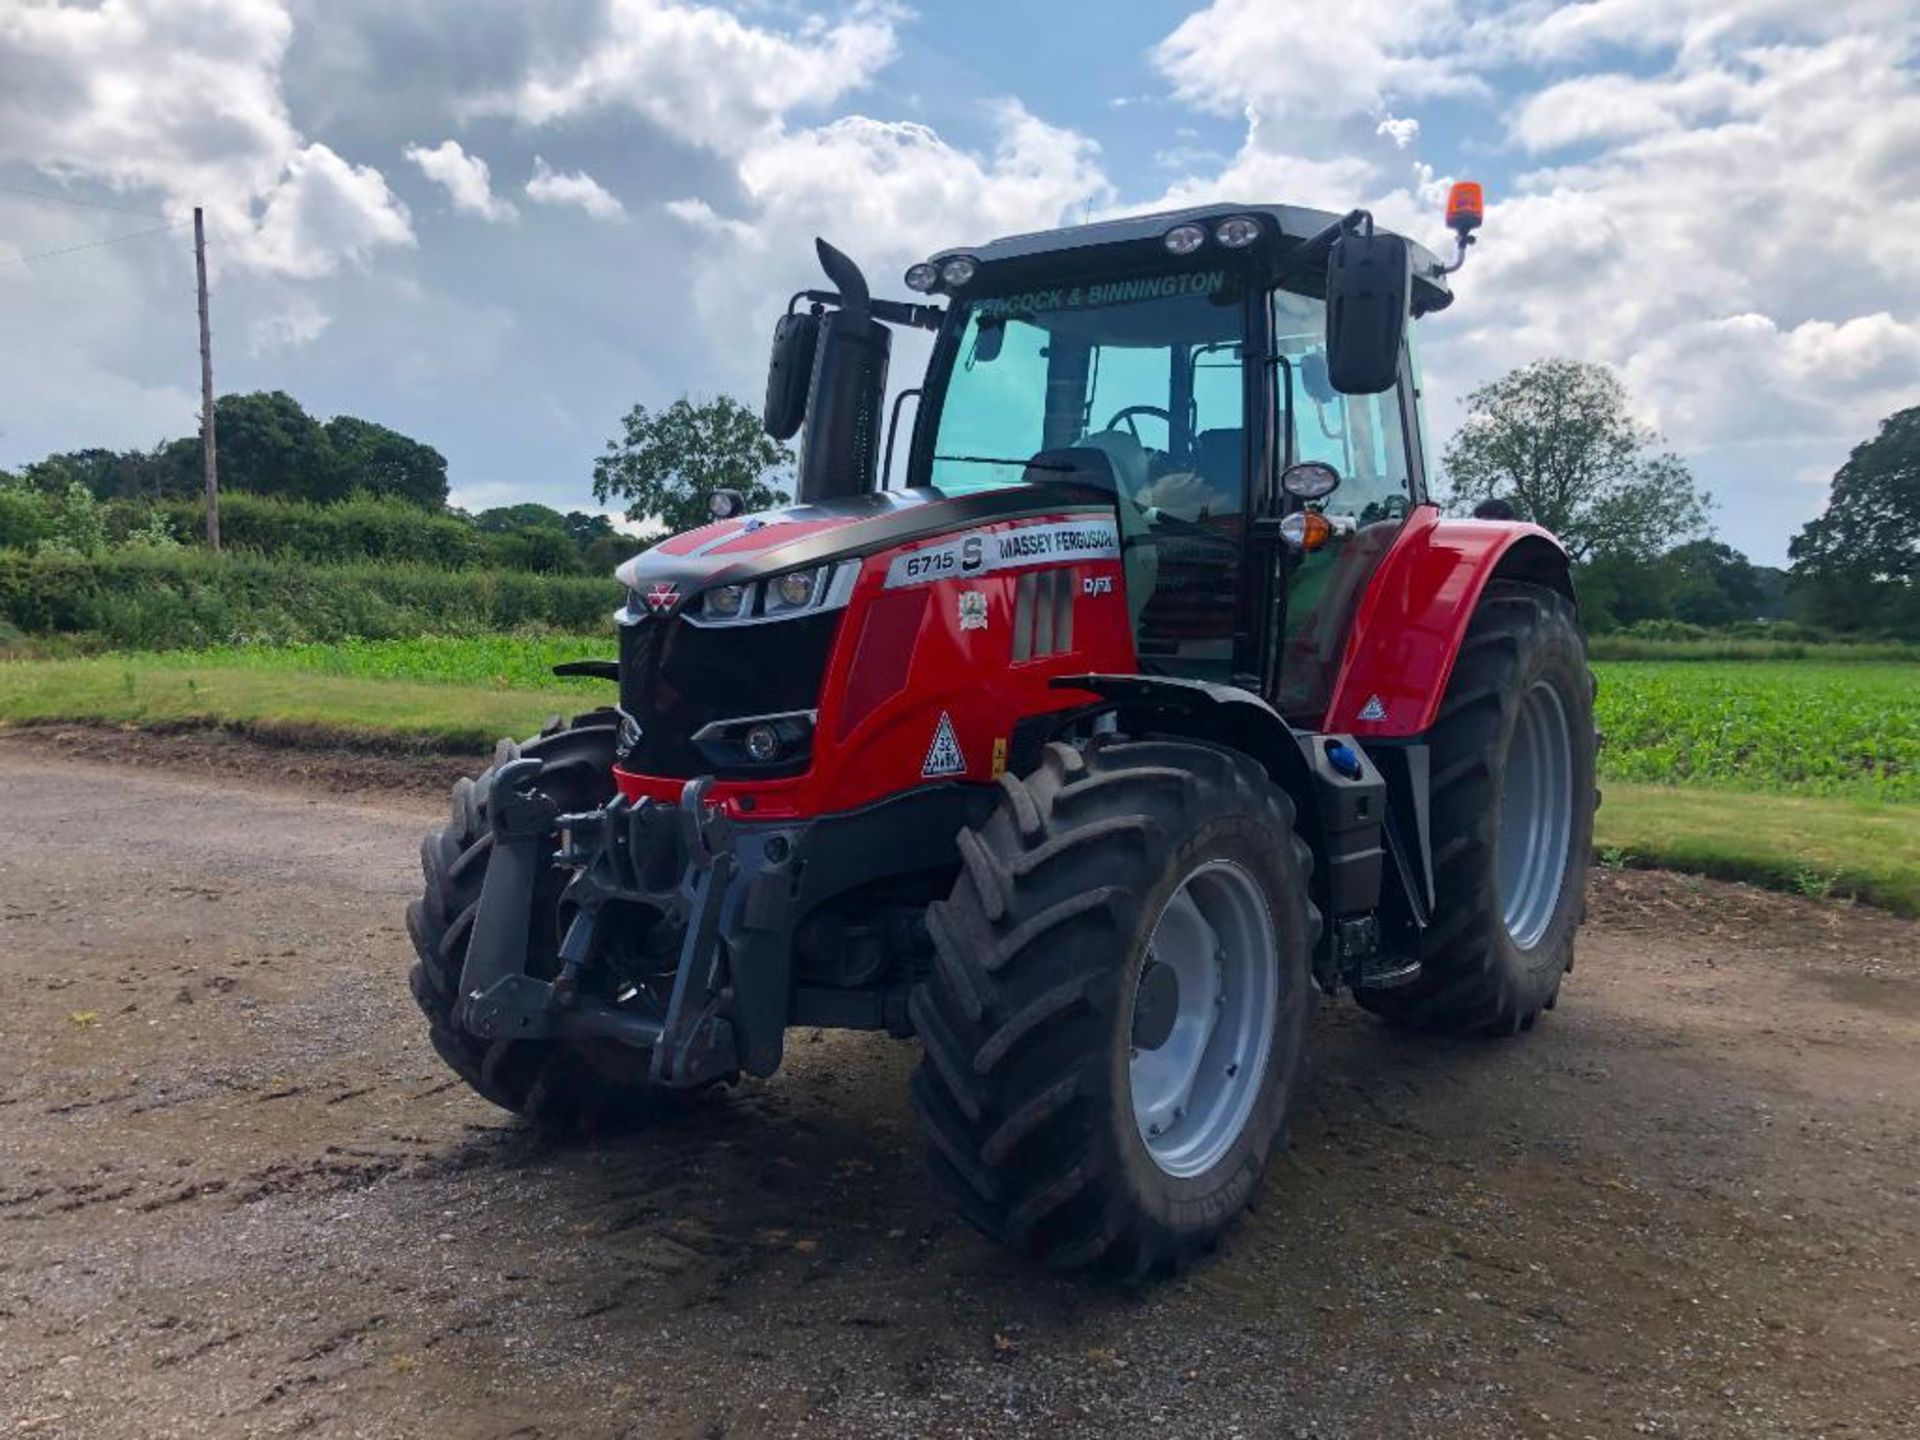 2019 Massey Ferguson 6715 S Dyna 6 50kph 4wd tractor c/w 3 manual spools, front linkage, air brakes, - Image 31 of 41